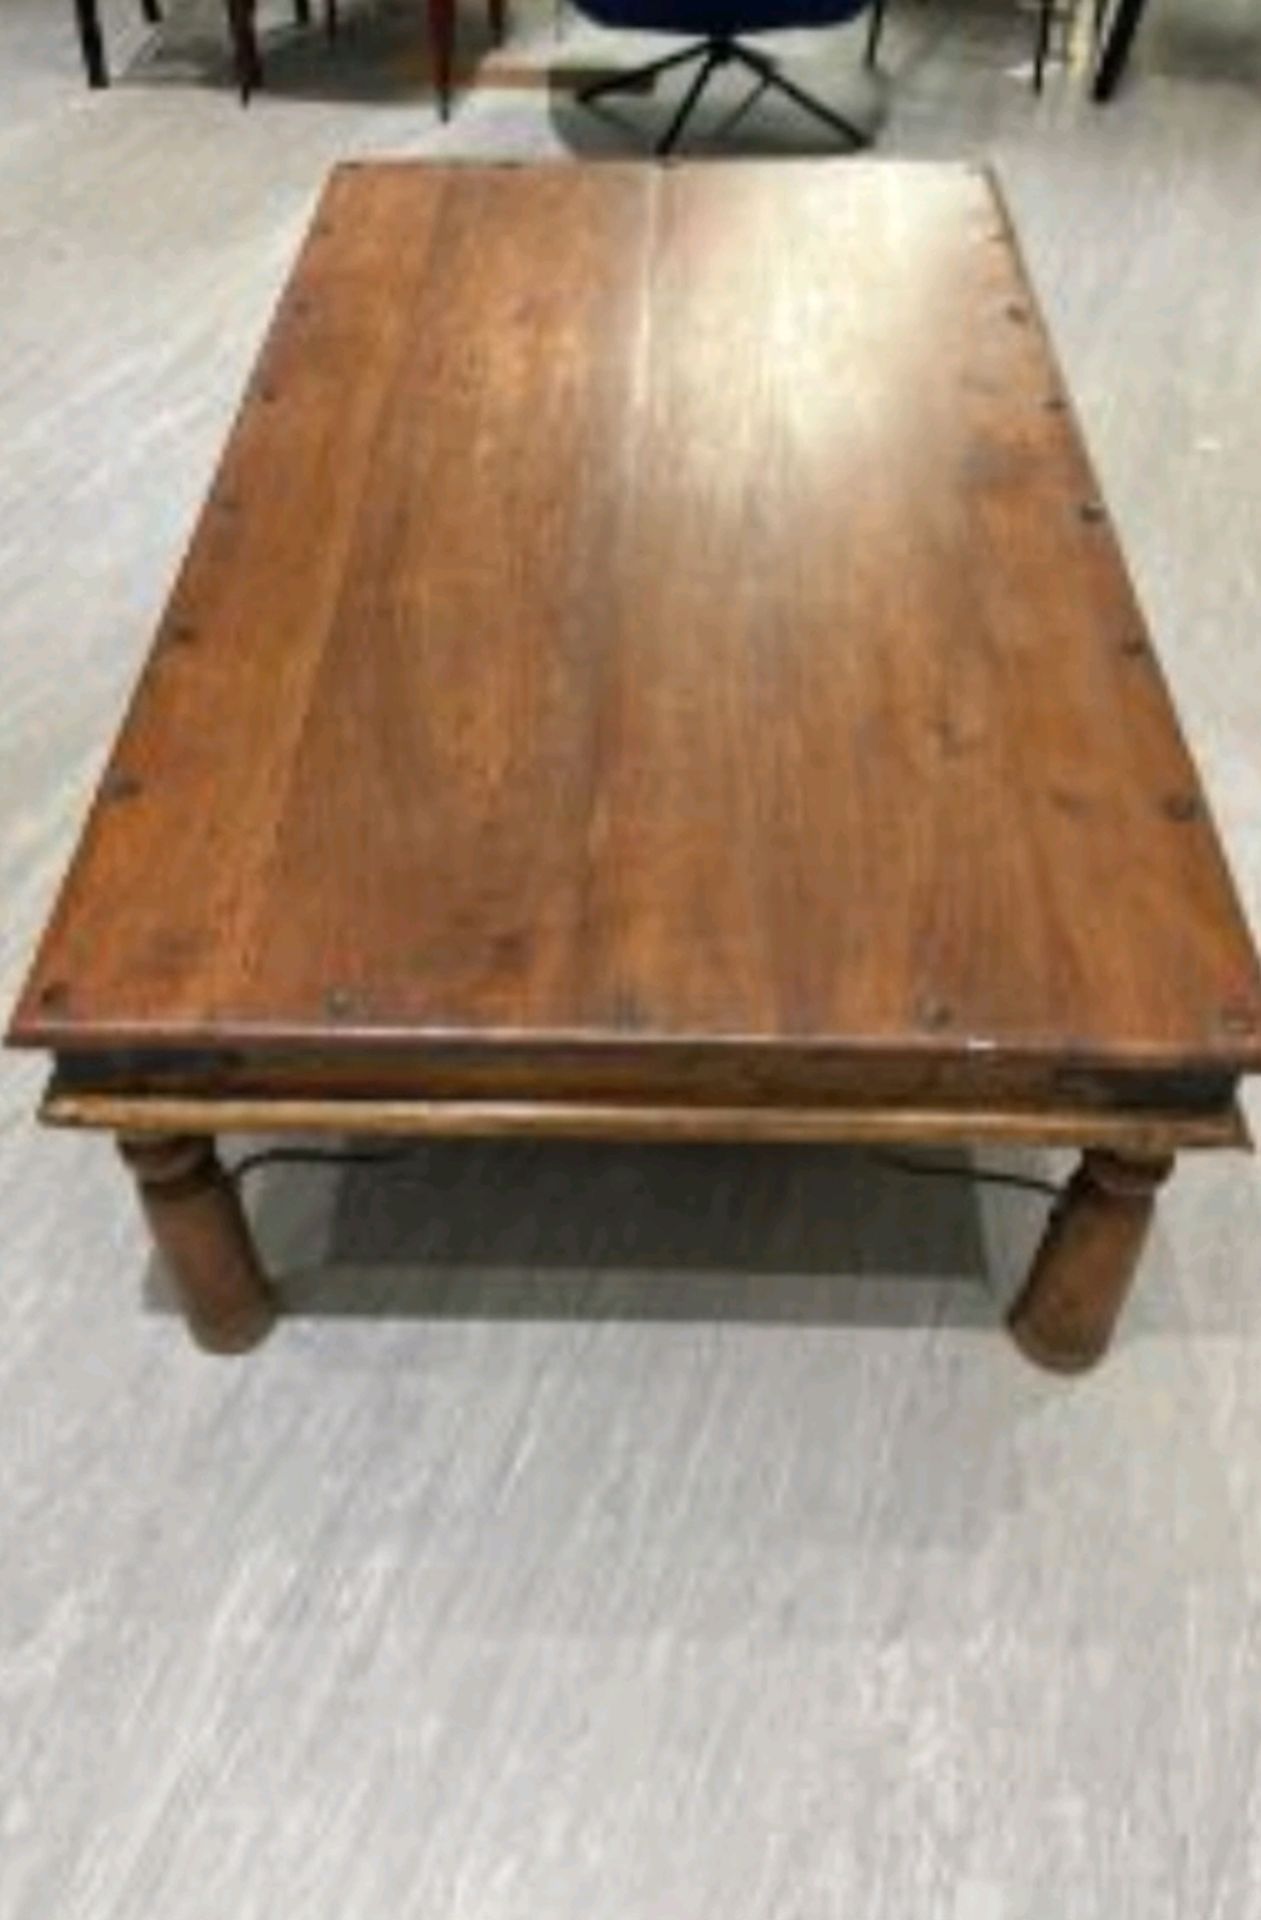 Amara Wooden Centrepiece Coffee Table - Image 2 of 3